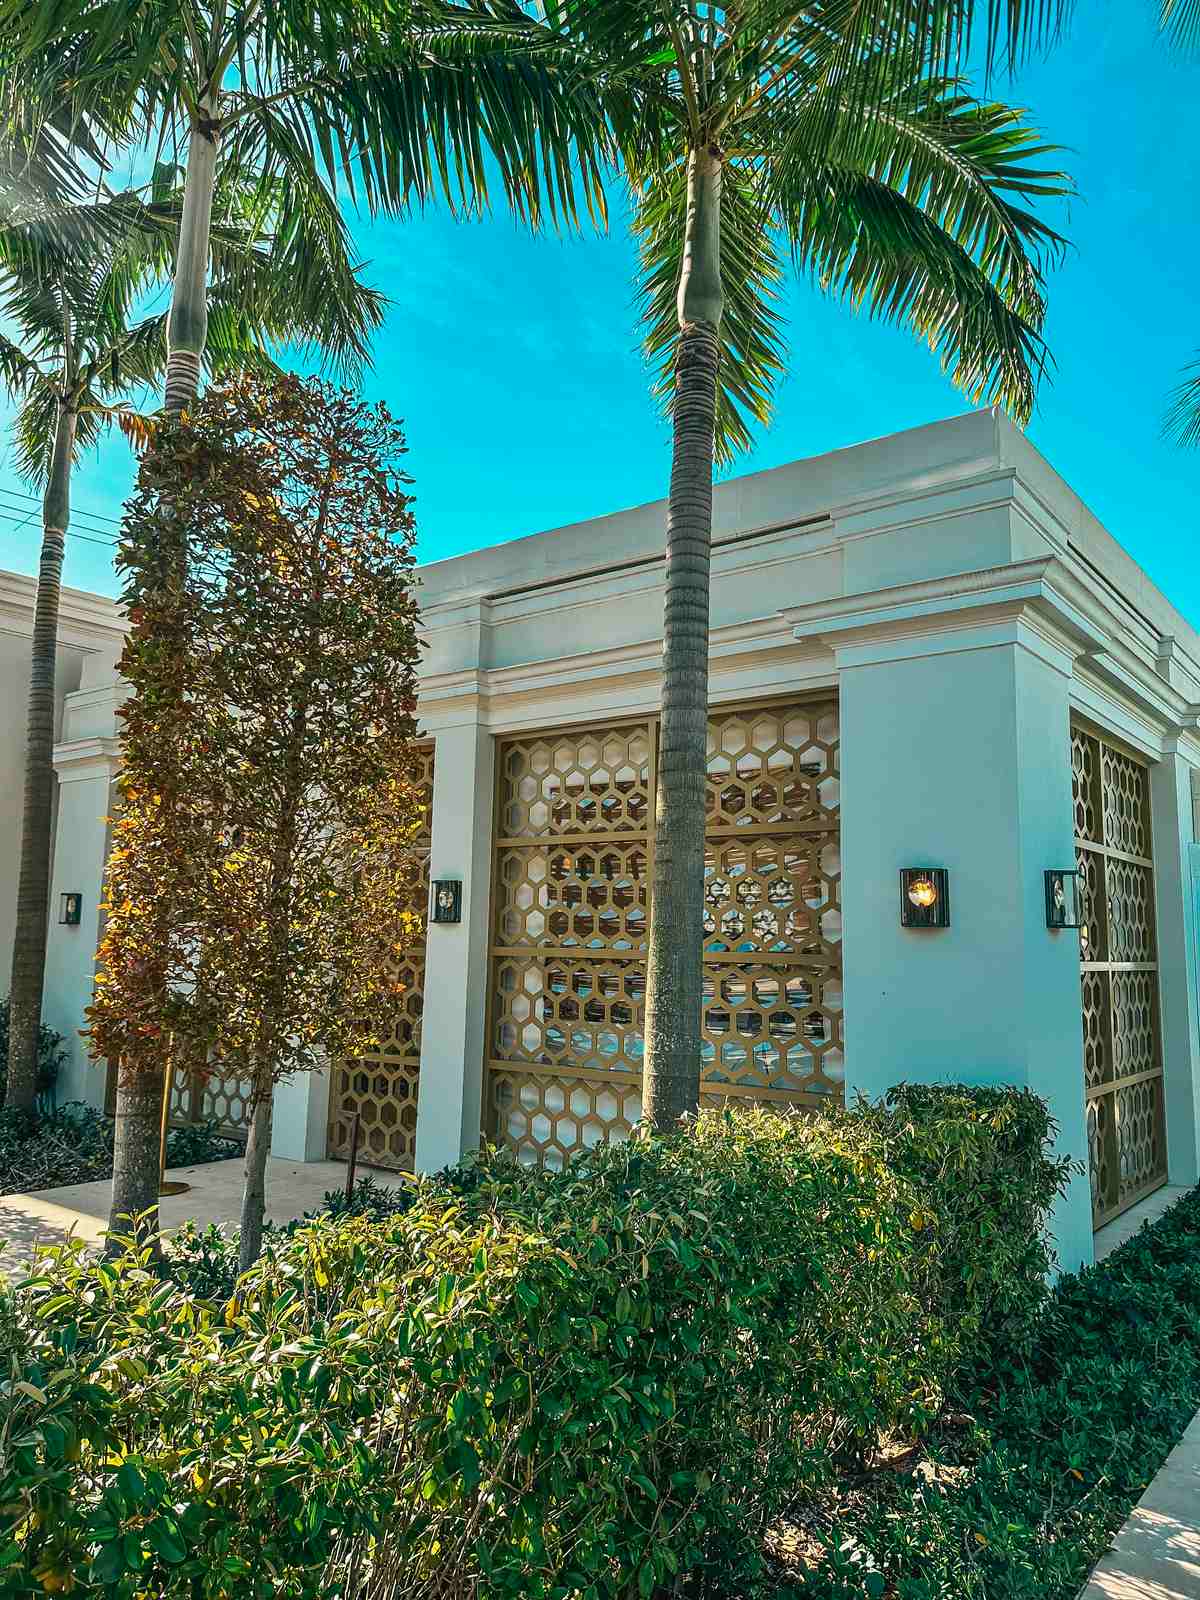 Exterior of The Hive Bakery and Cafe in West Palm Beach